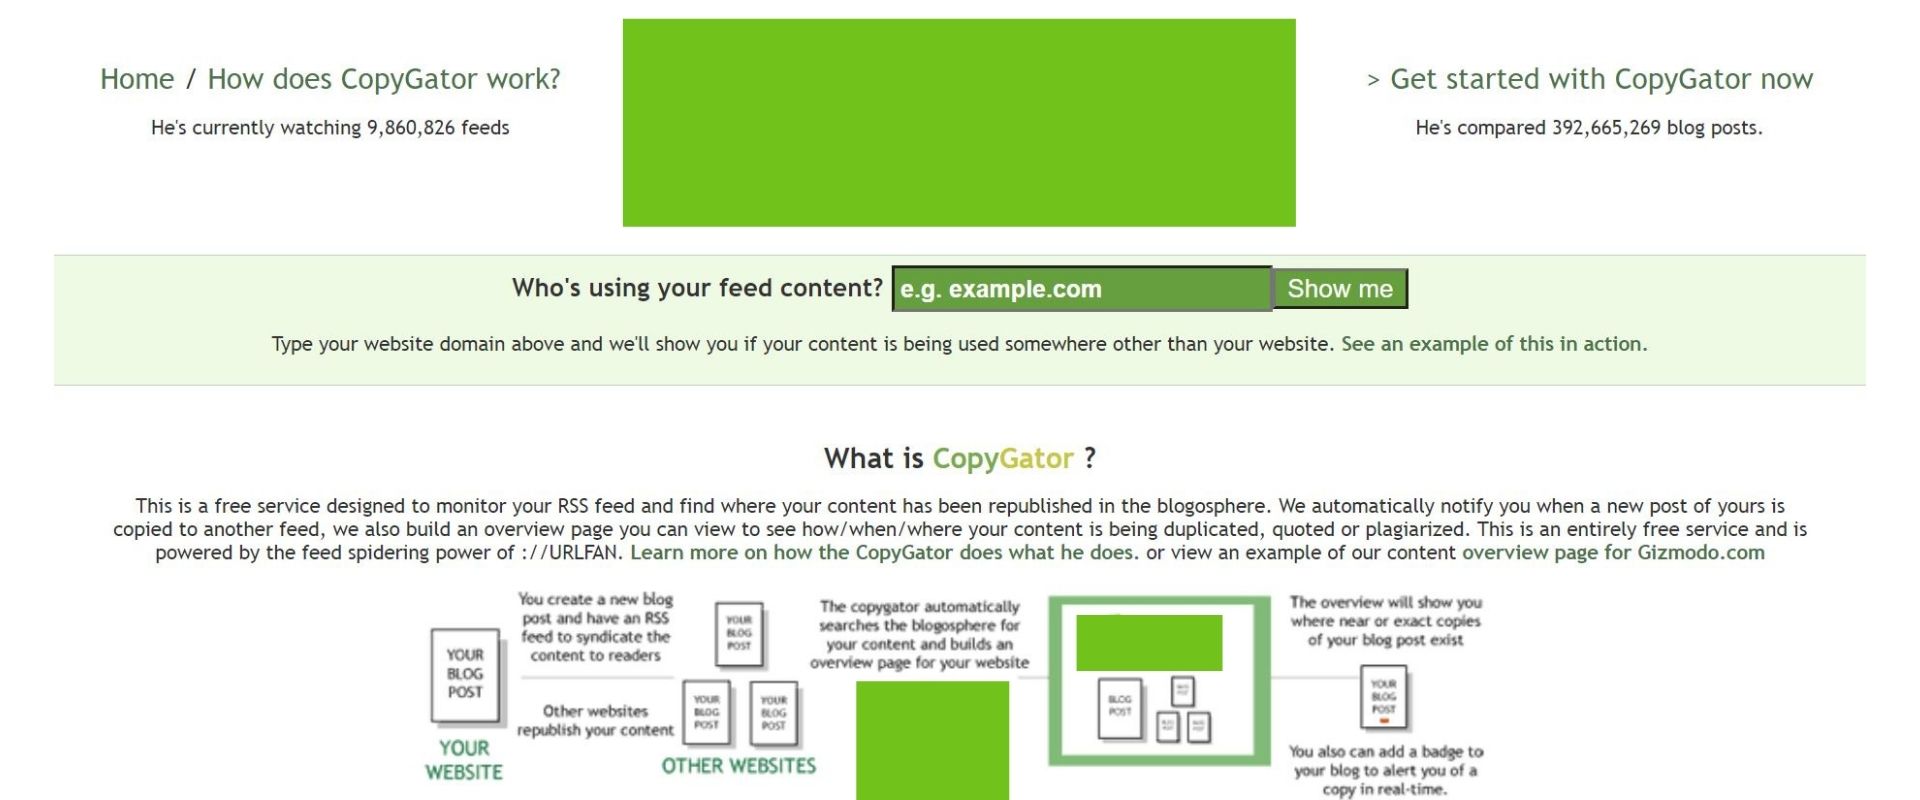 Homepage of CopyGator plagiarism checker tool.